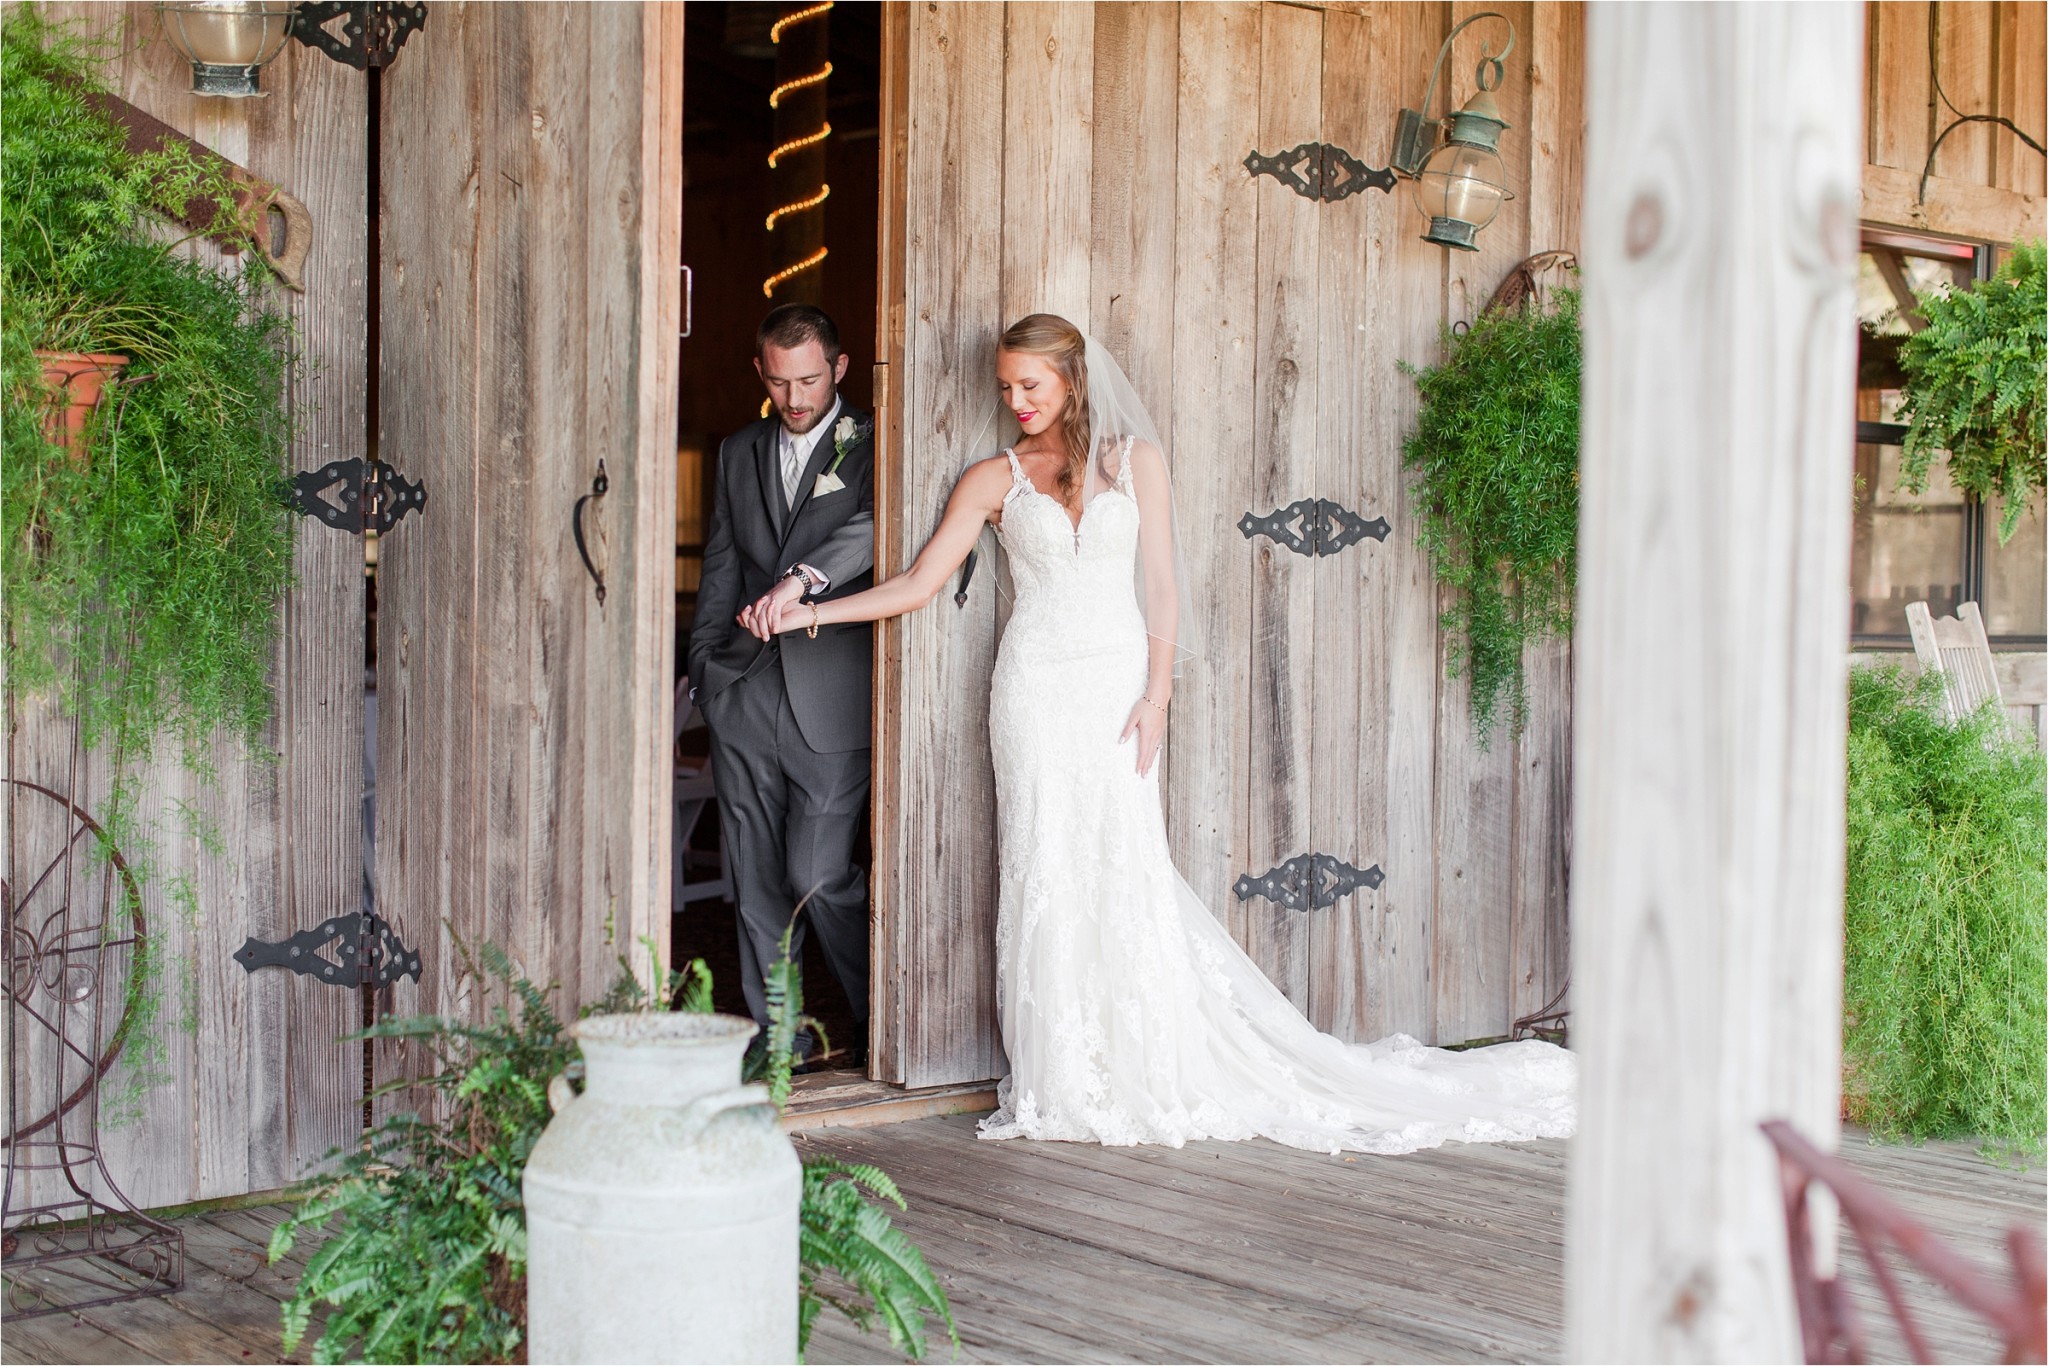 exchanging letters at their Oak Hollow Farm Wedding